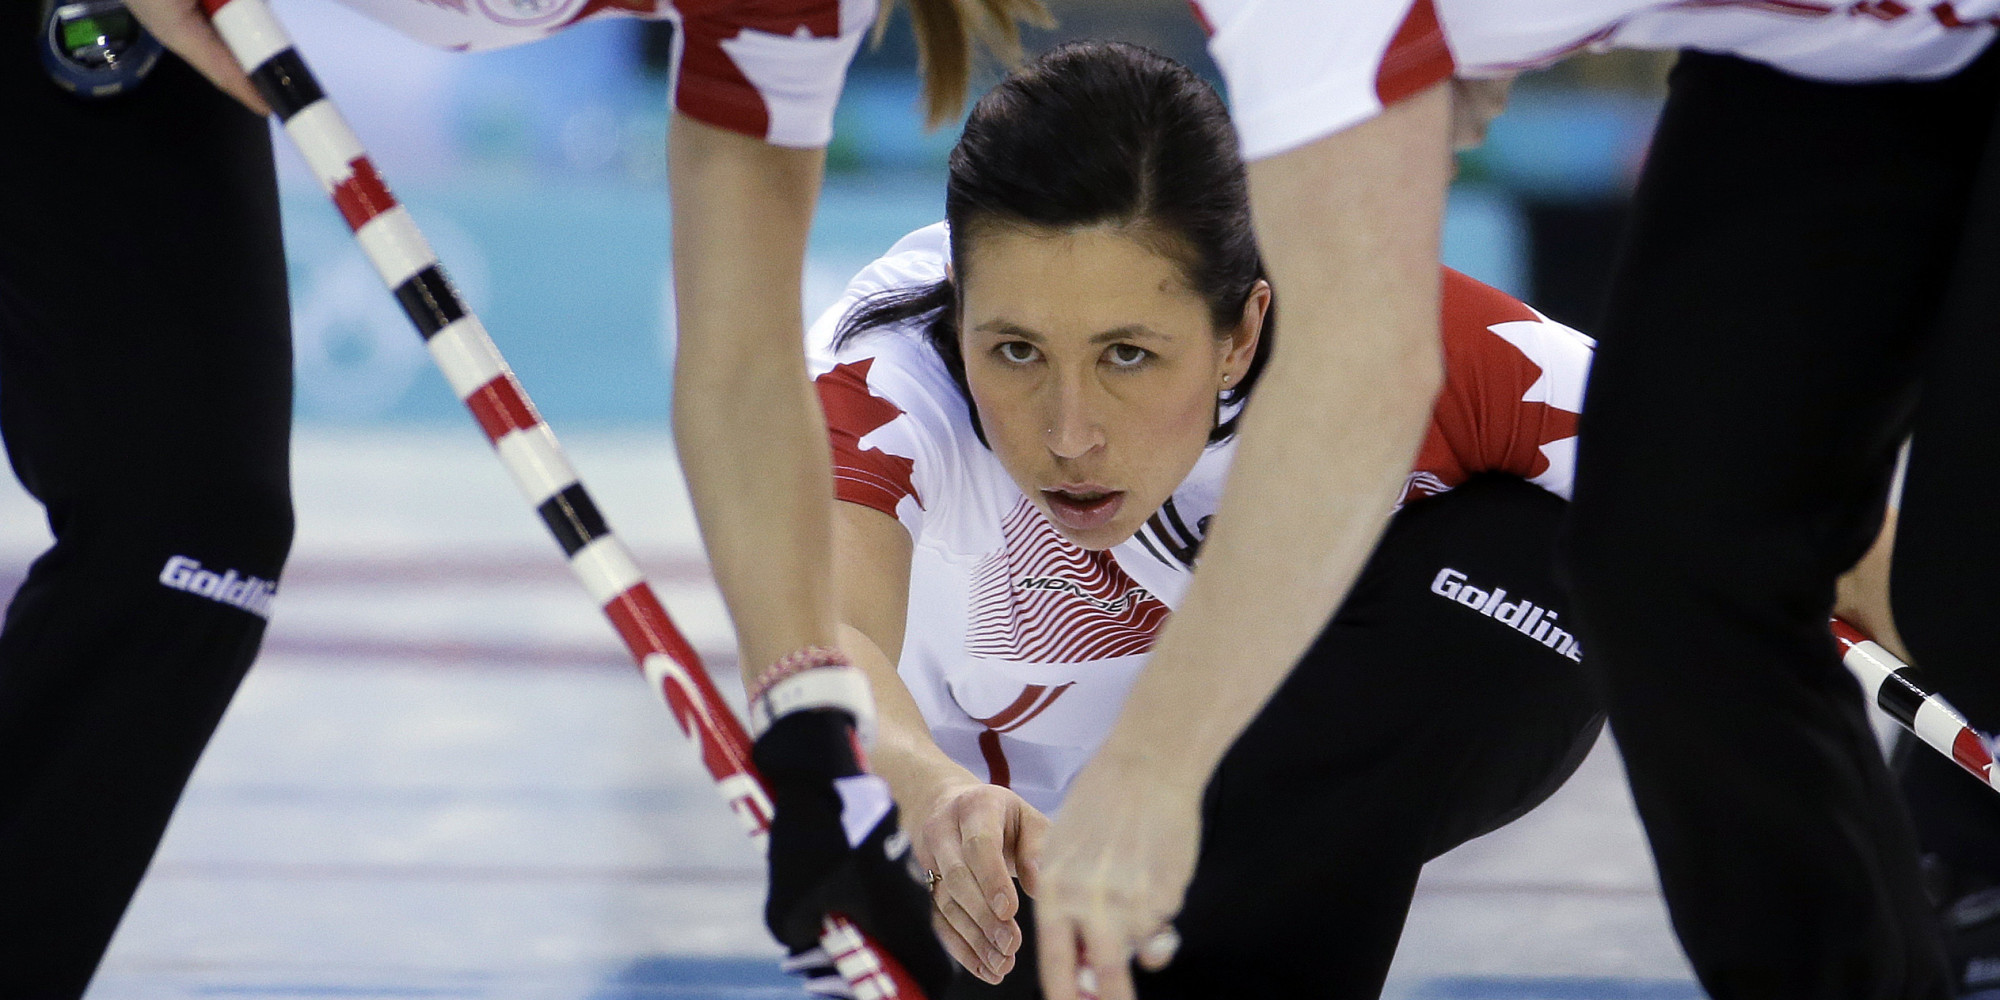 Women S Curling Team In The Discipline Of Canadian Gold